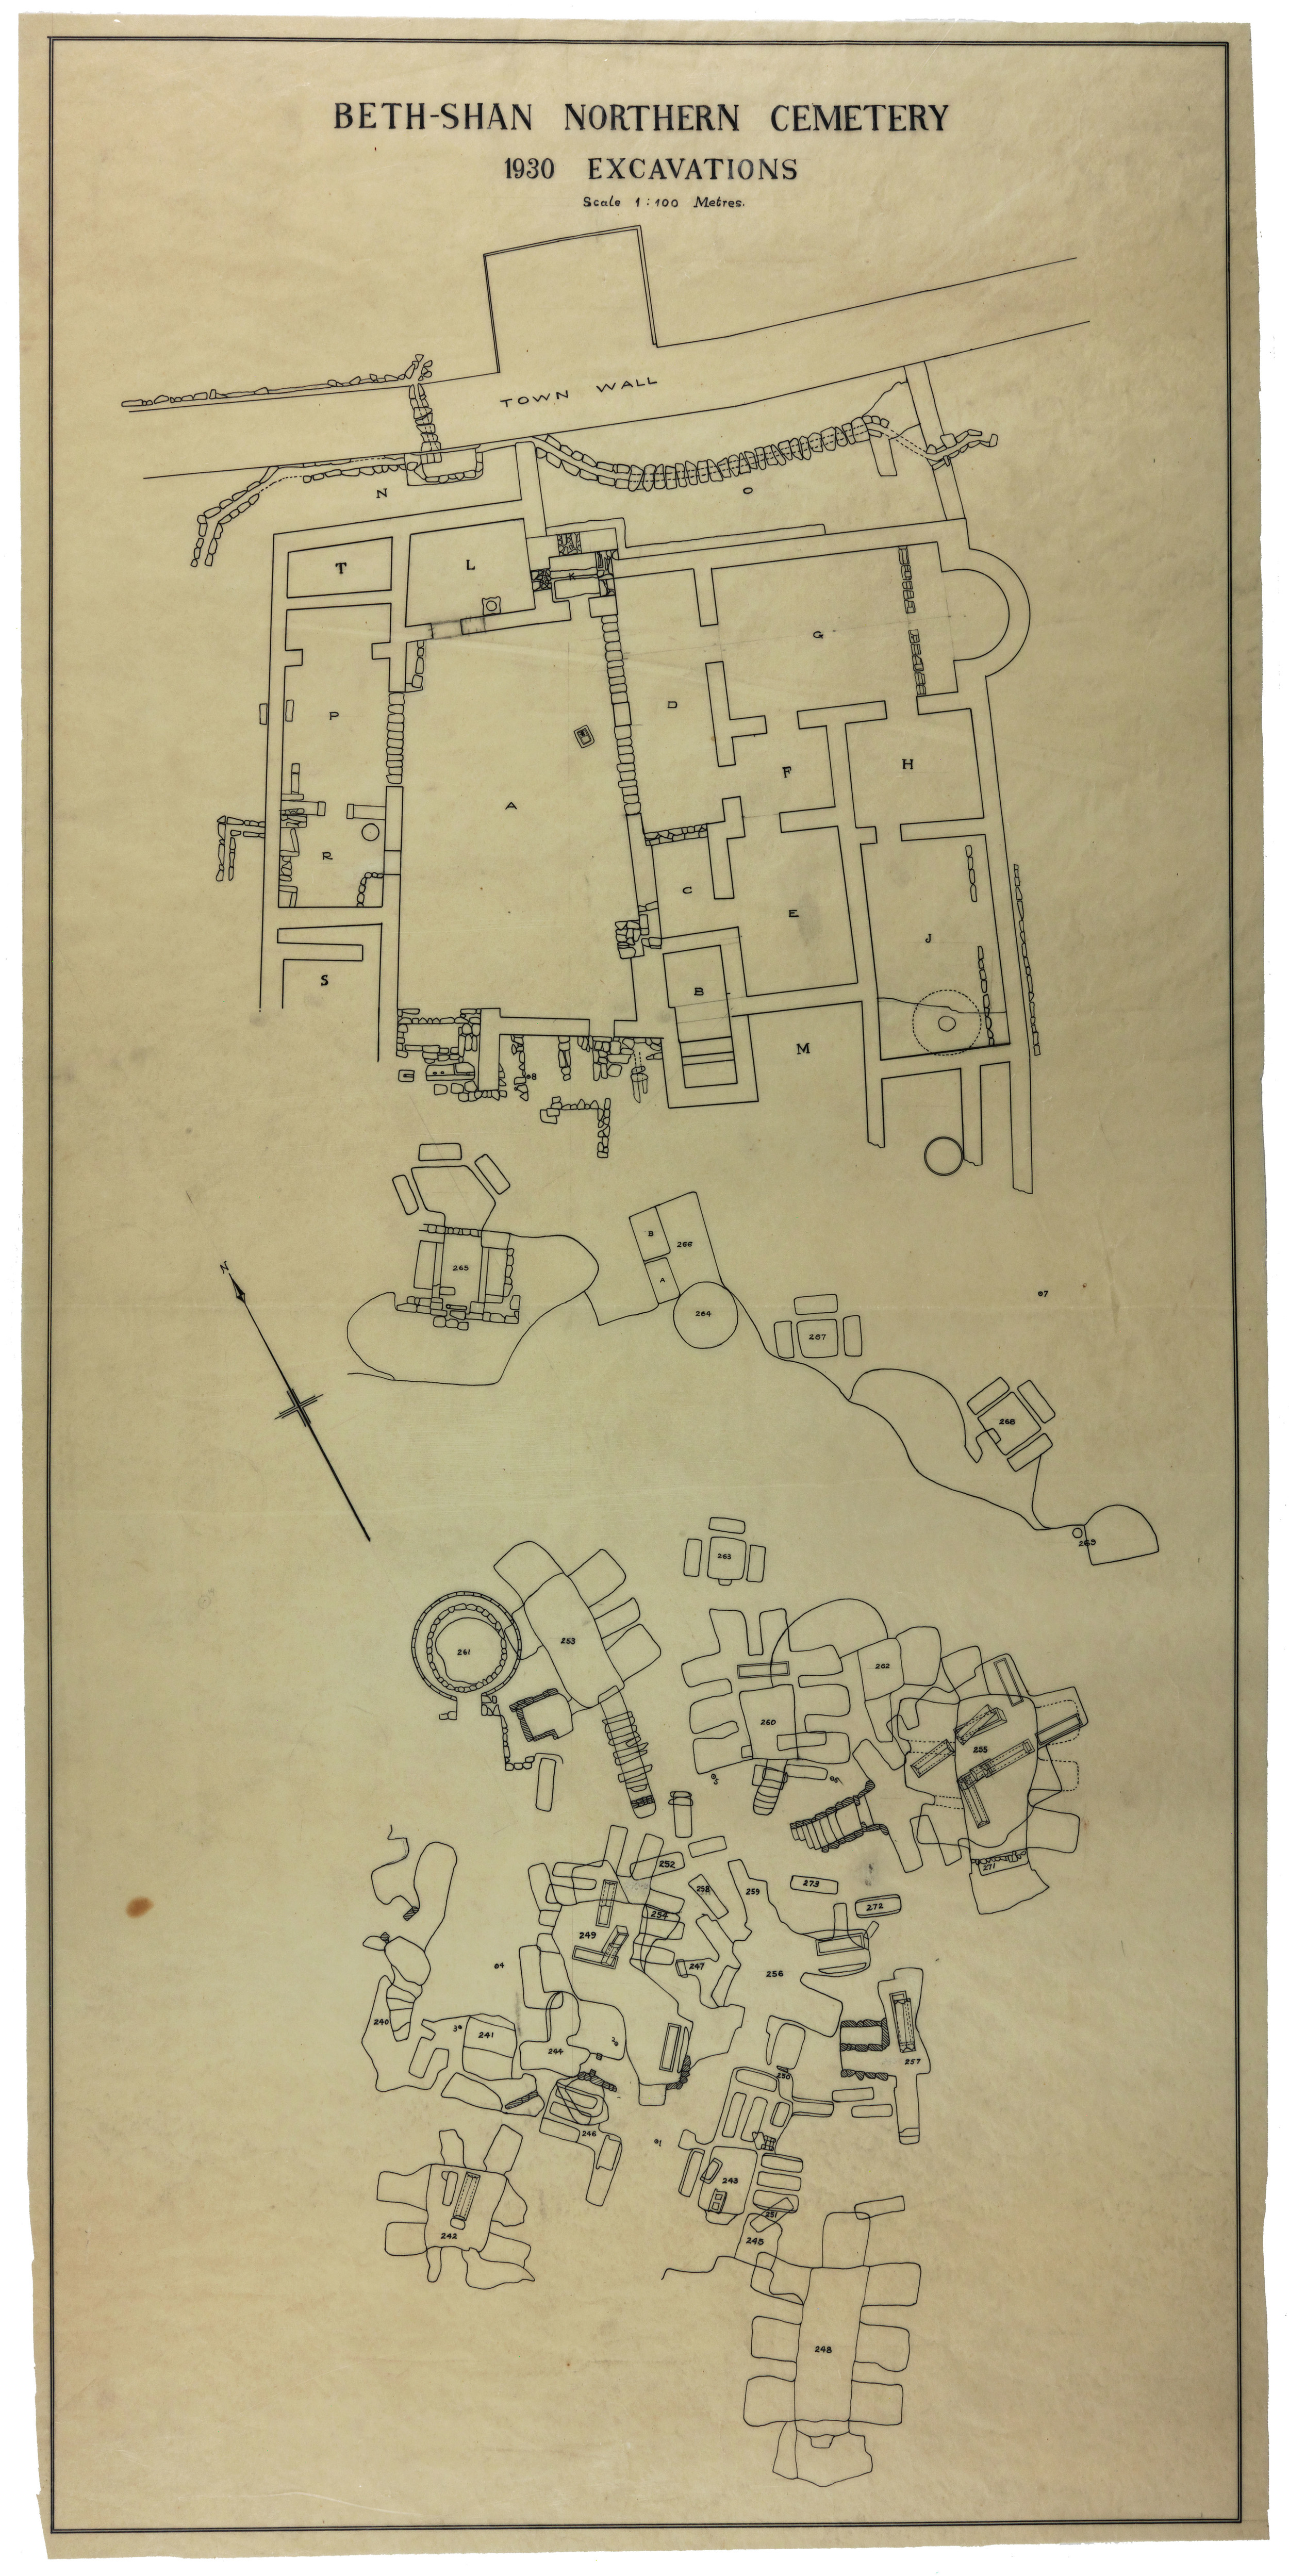 Plan of tombs excavated in 1930.